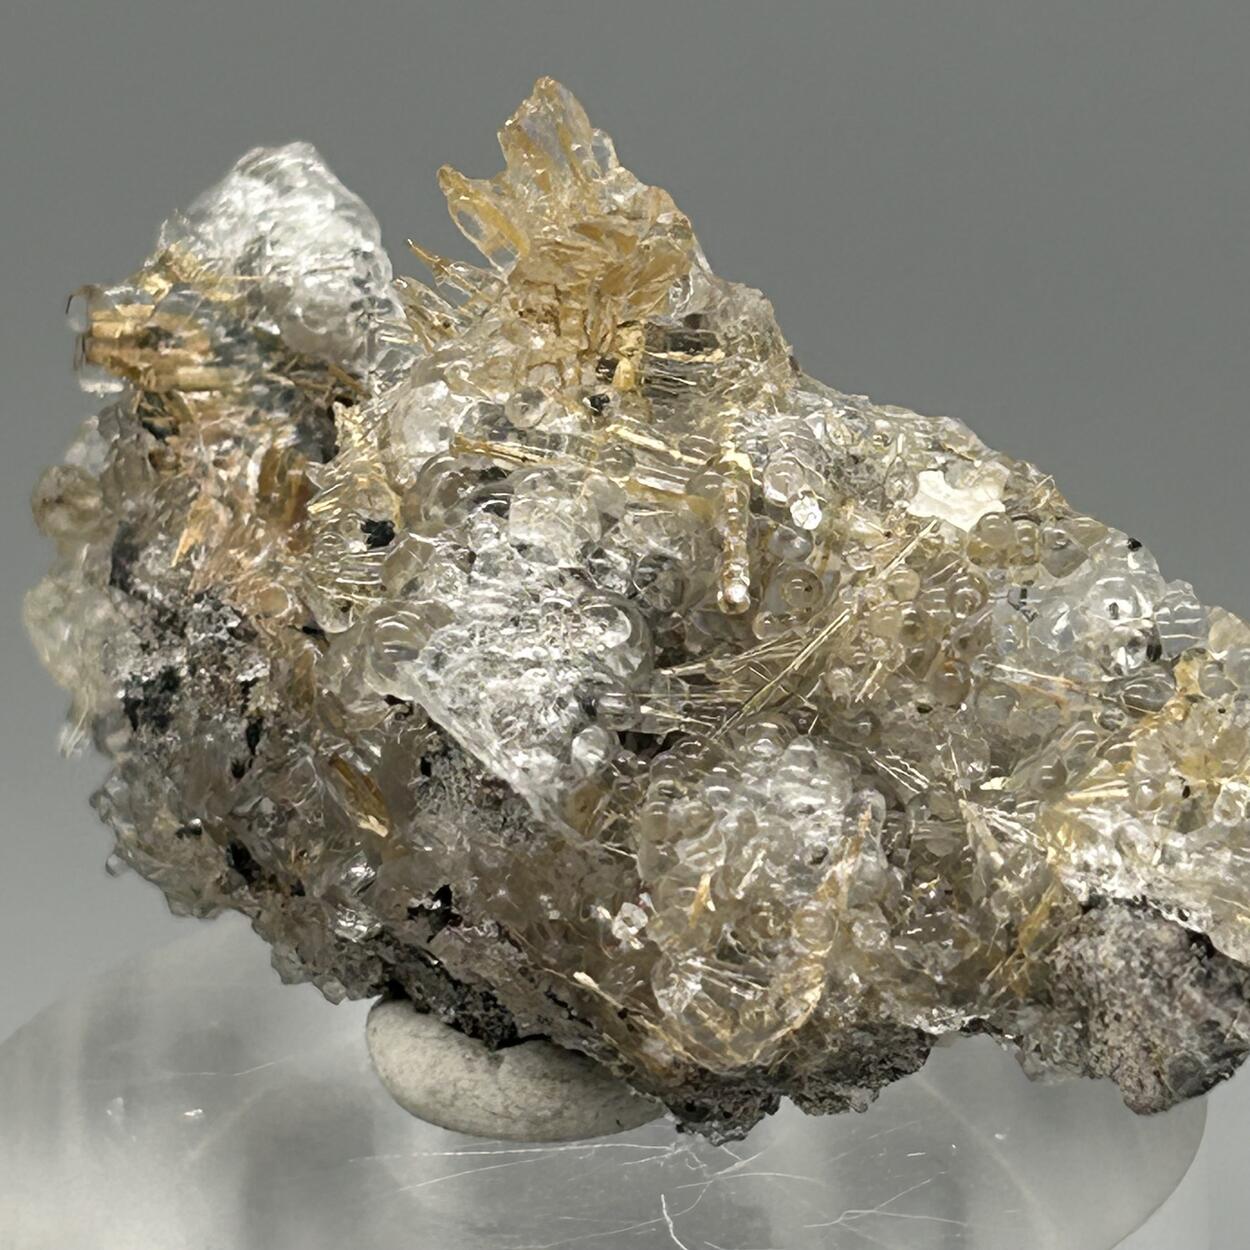 Hyalite With Rutile Inclusions